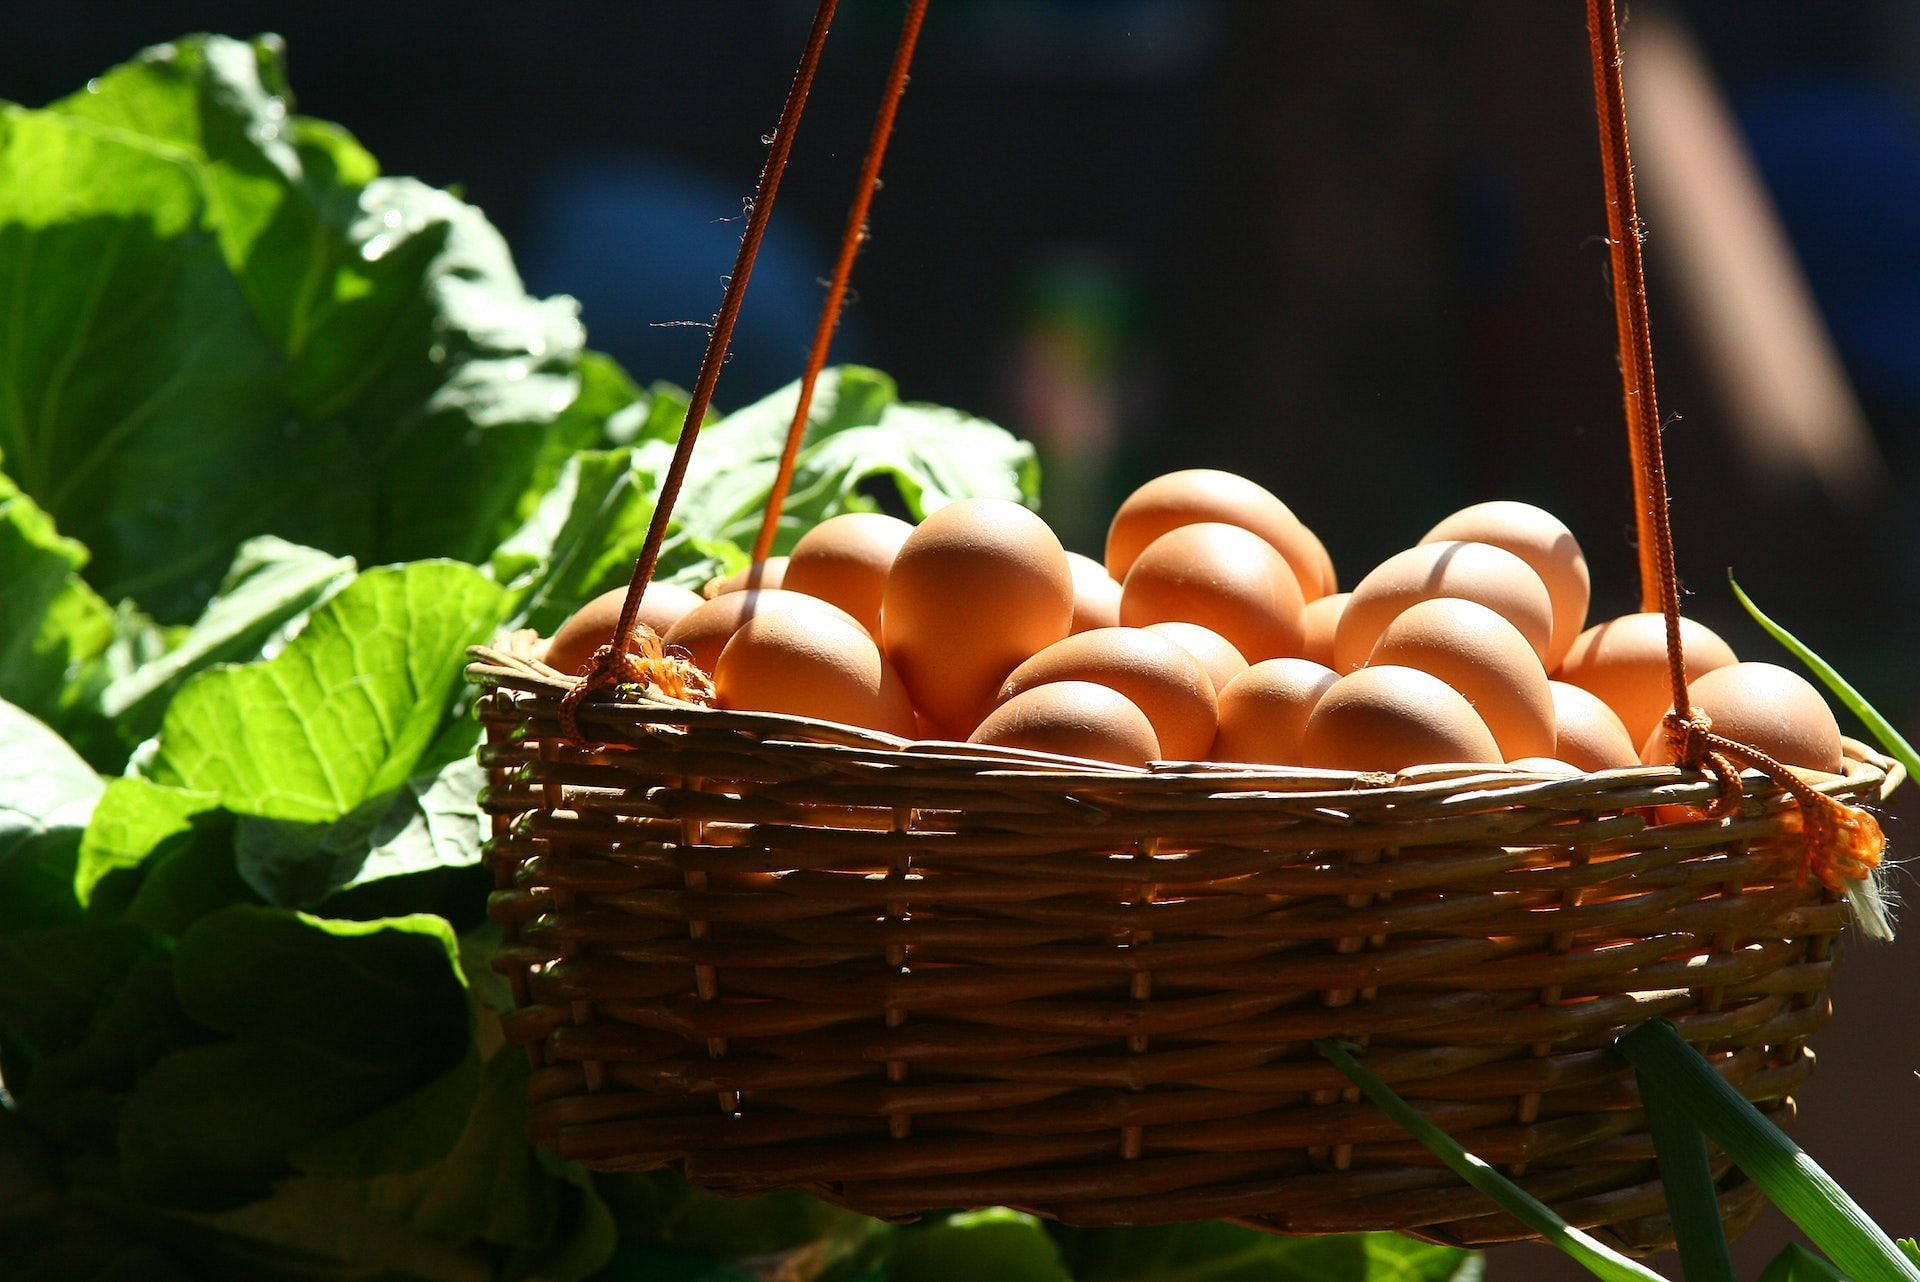 Eggs are suitable for people with IBS. (Photo via Pexels/Rodolfo Clix)